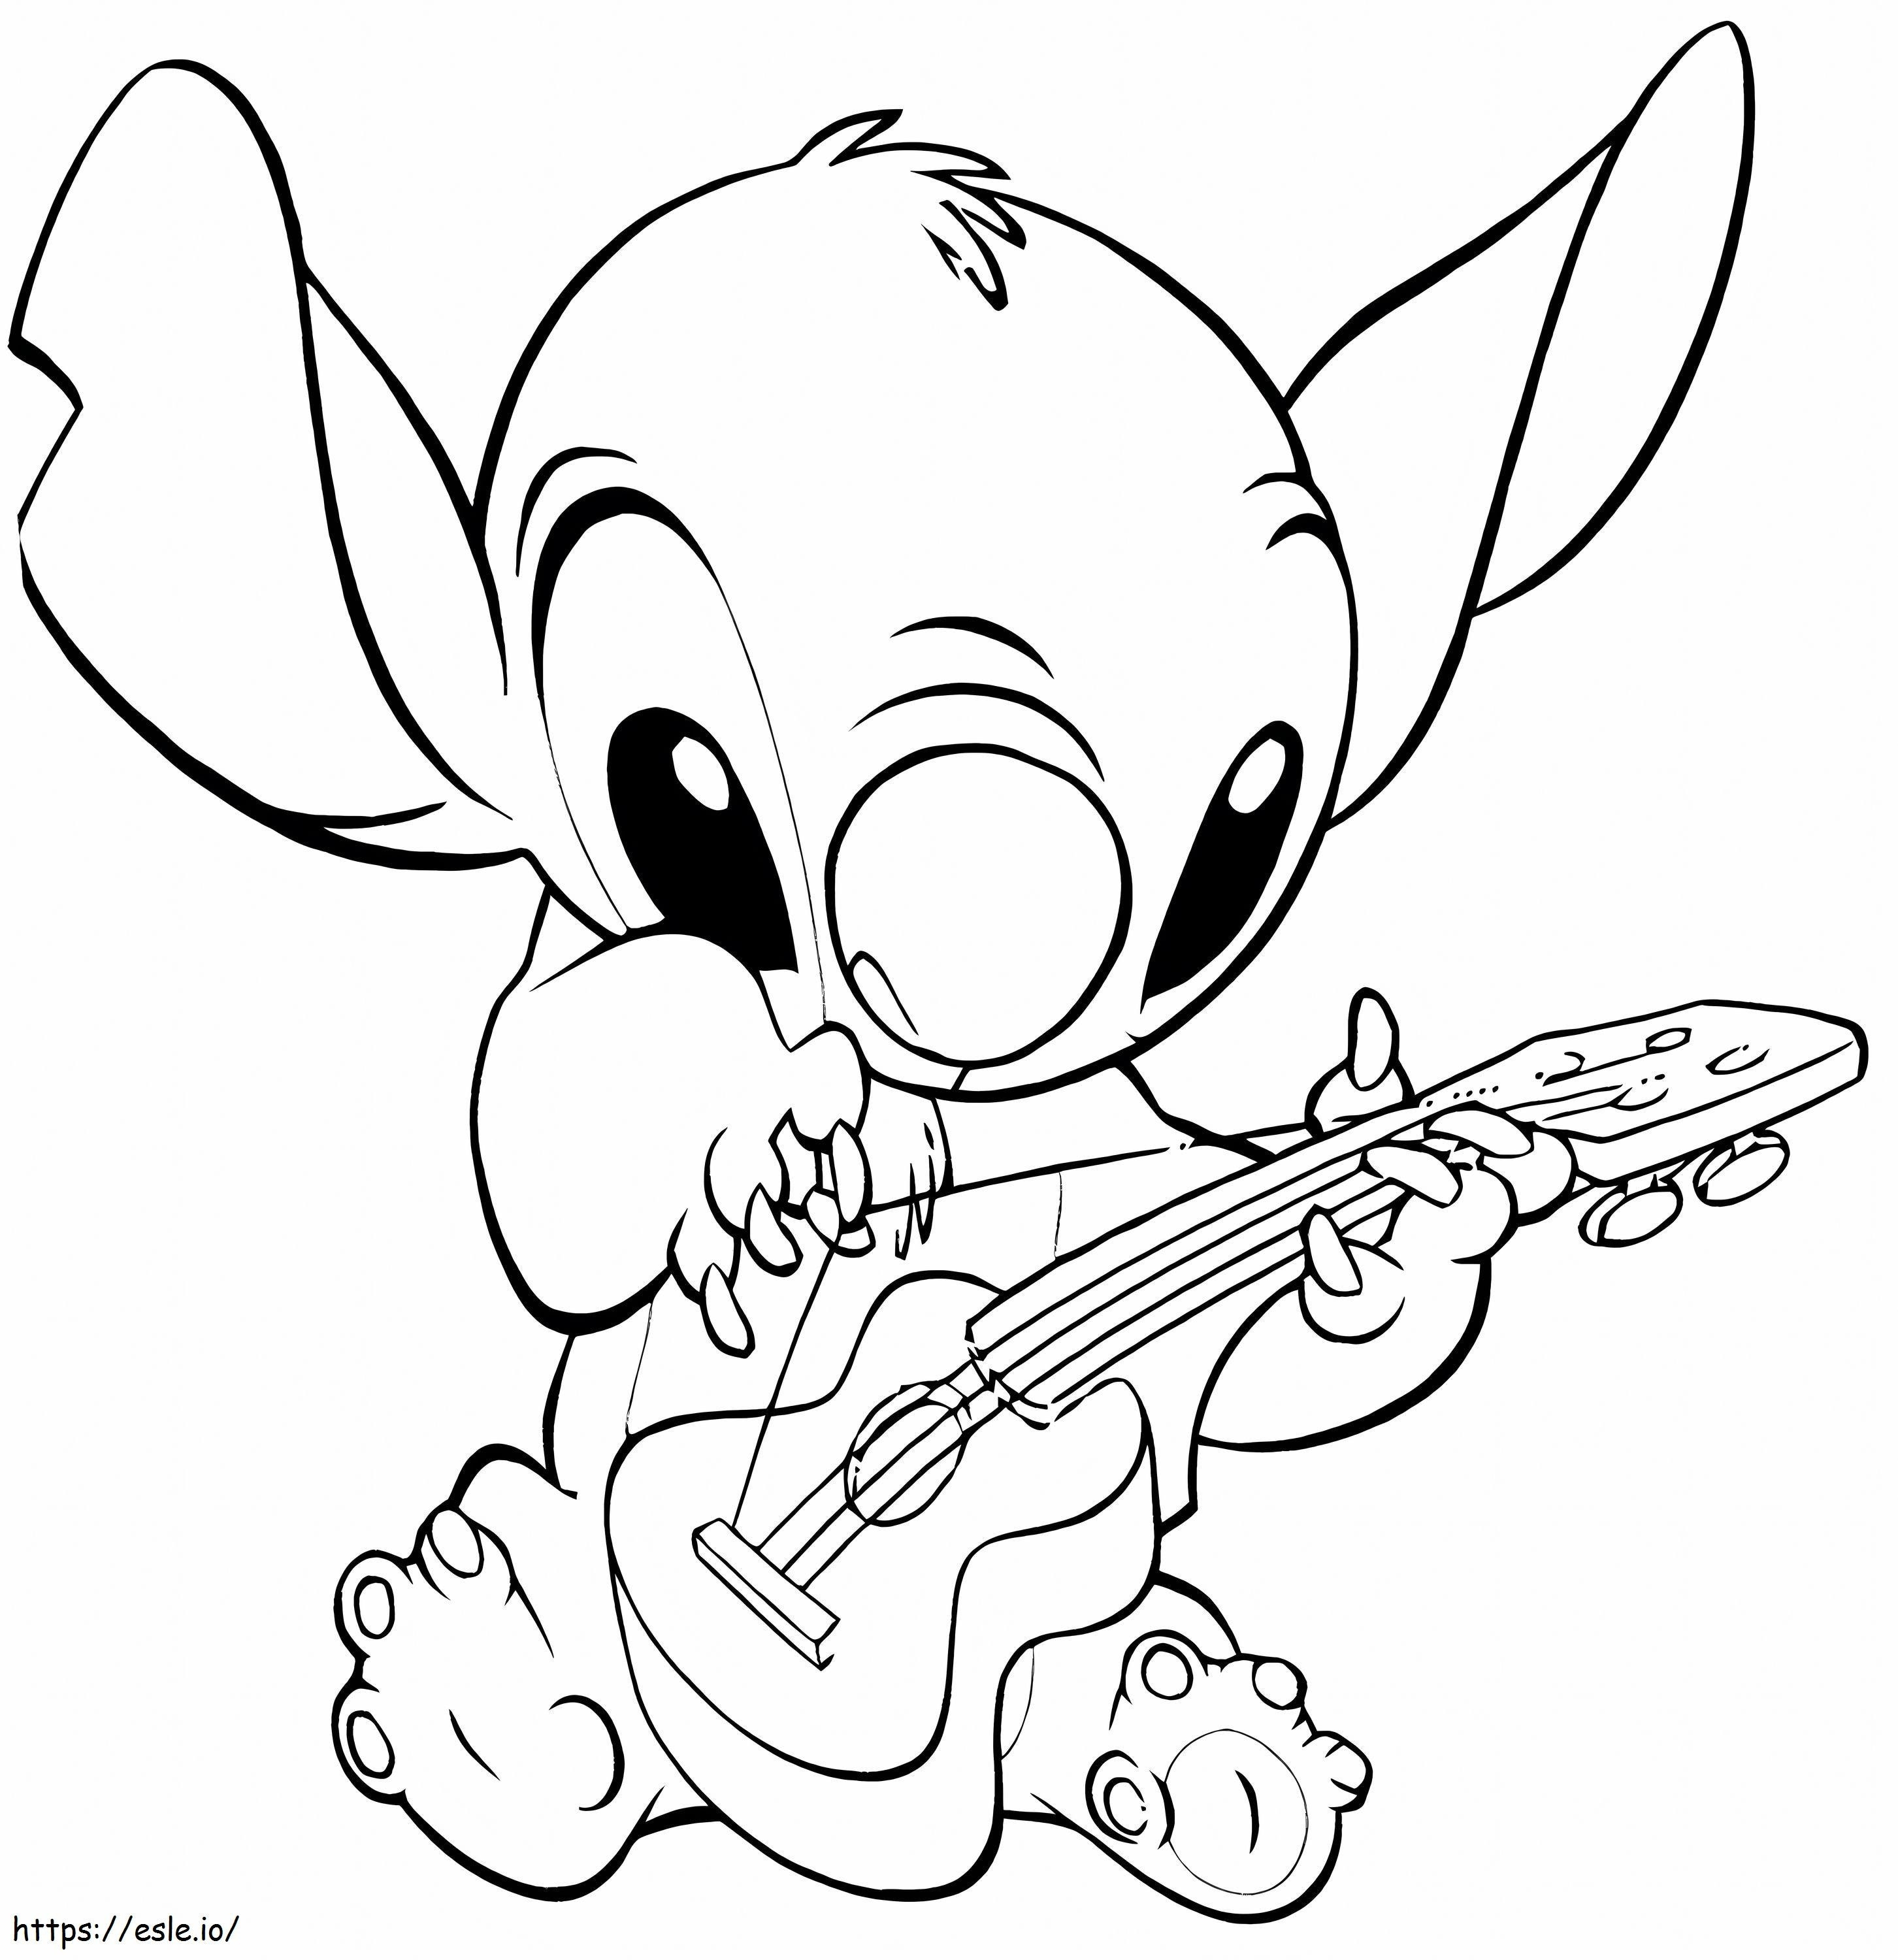 Disney Stitch Playing Guitar coloring page